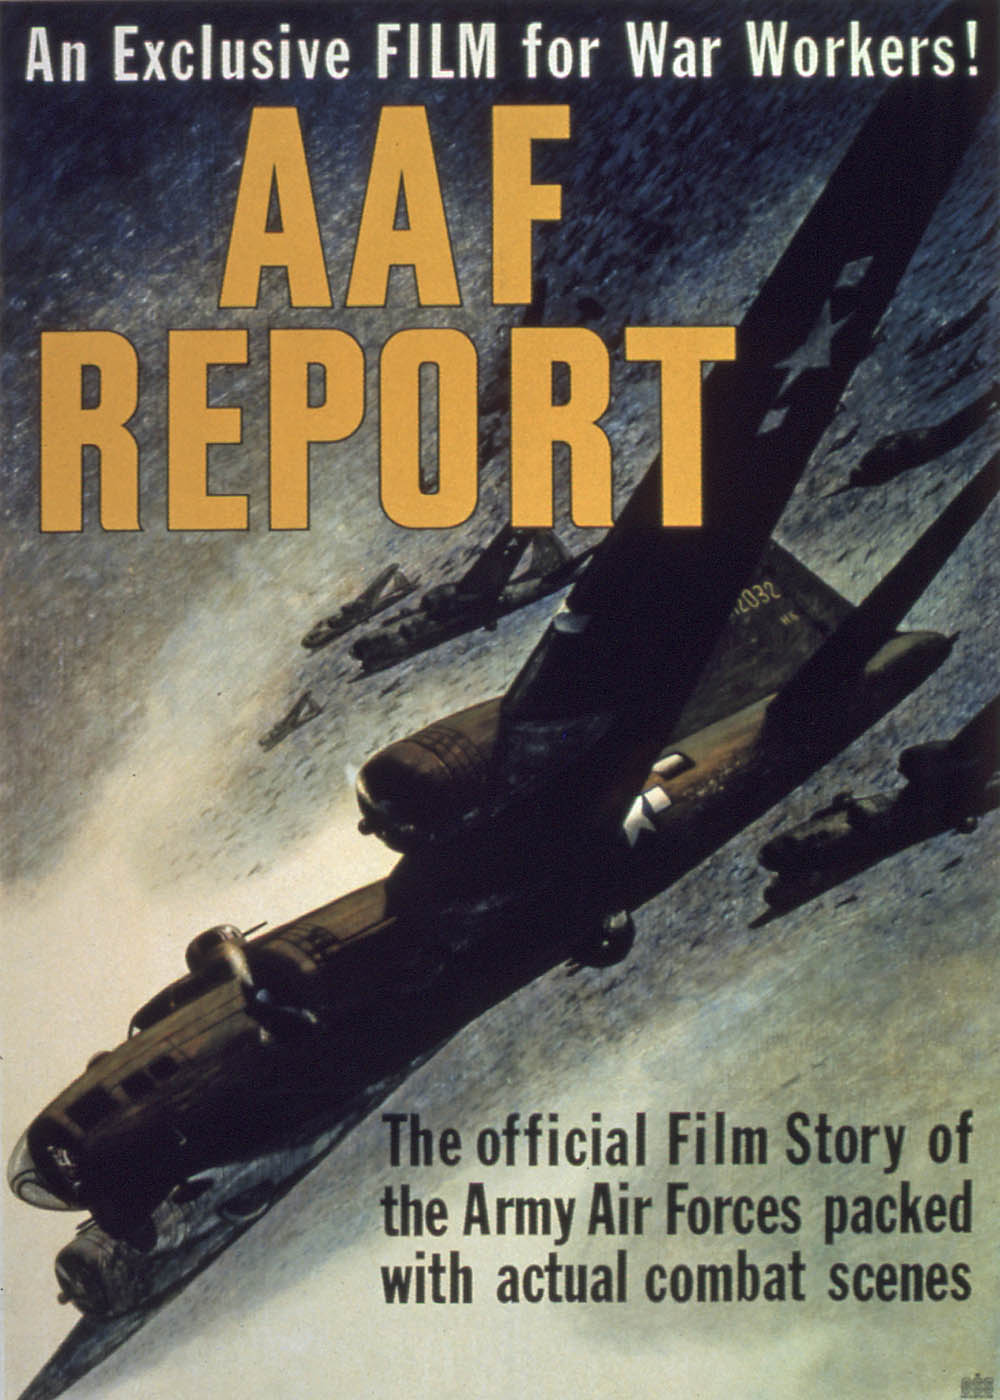 AAF Report: An Exclusive Film for War Workers! The official Film Story of the Army Air Forces packed with actual combat scenes. (Office for Emergency Management, Office of War Information, Domestic Operations Branch, Bureau of Special Services via National Archives and Records Administration.)